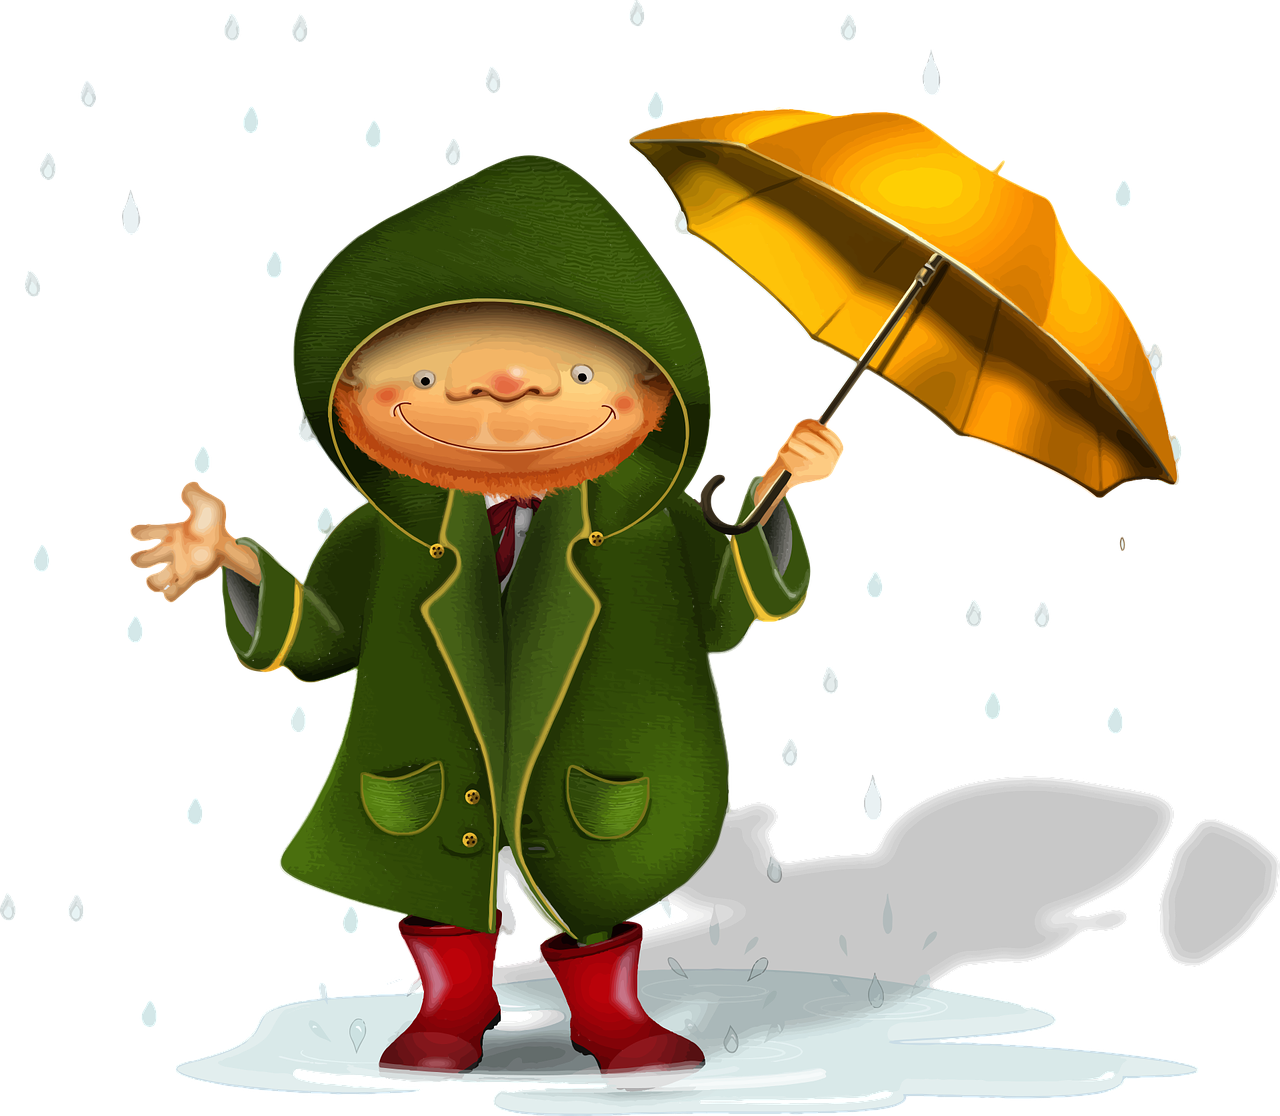 a child holding an umbrella in the rain, a digital rendering, naive art, wikihow illustration, cartoon style illustration, latex suit and raincoat, flash photo